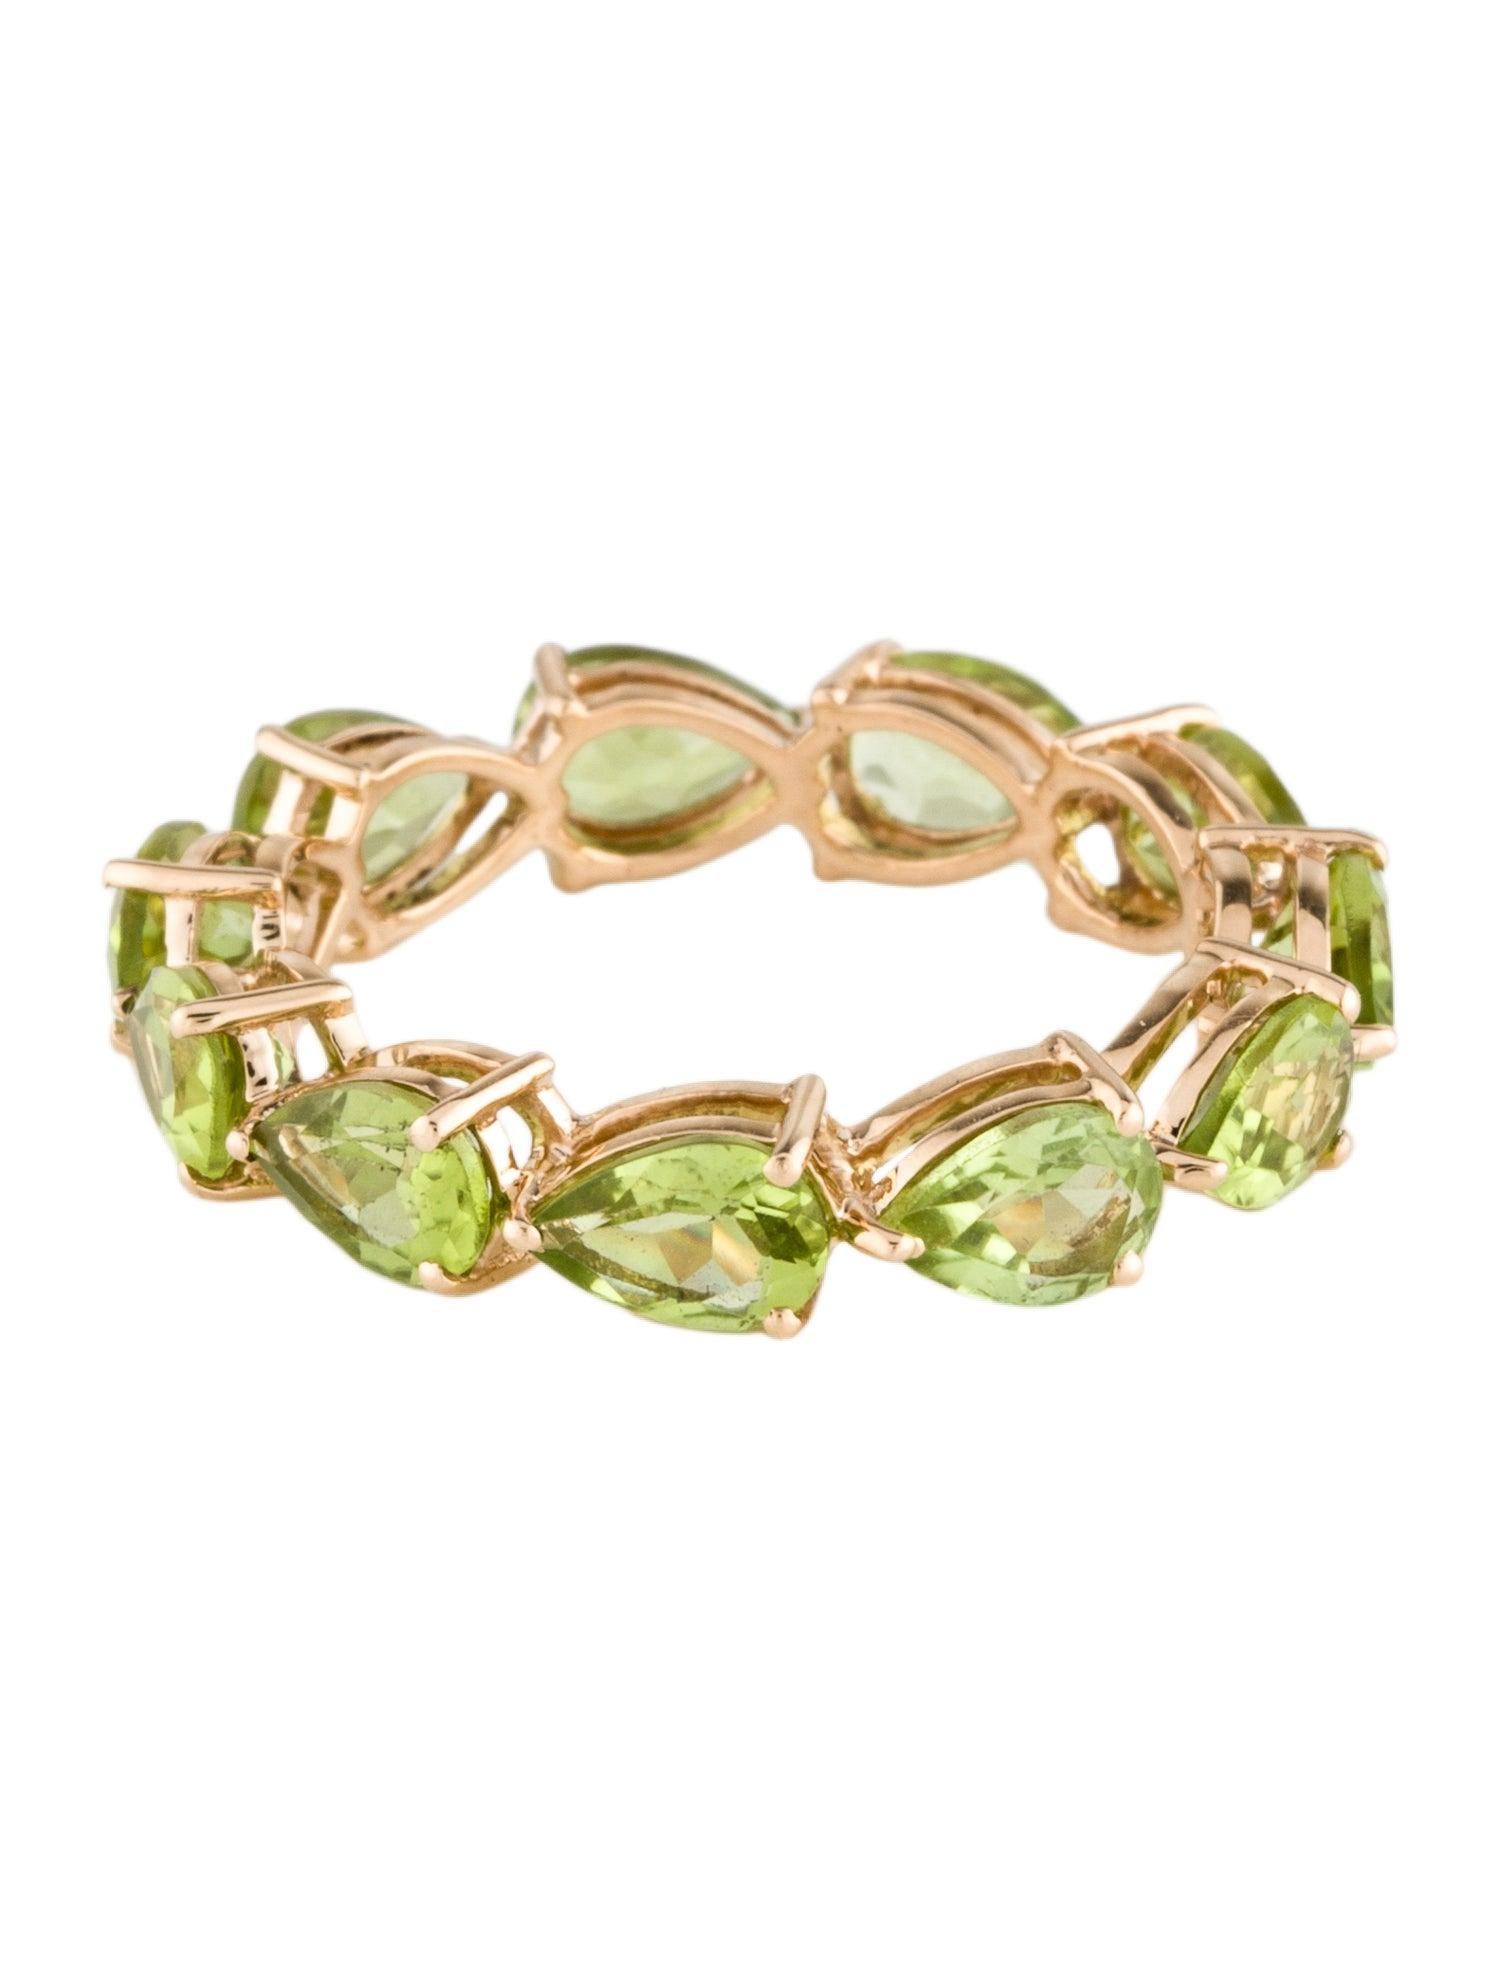 Celebrate the brilliance of fine jewelry with our 14K Yellow Gold Peridot Eternity Band. Perfectly crafted to size 7.75, this exquisite piece showcases 4.70 carats of Pear Modified Brilliant Peridot, set in a continuous circle to symbolize eternal